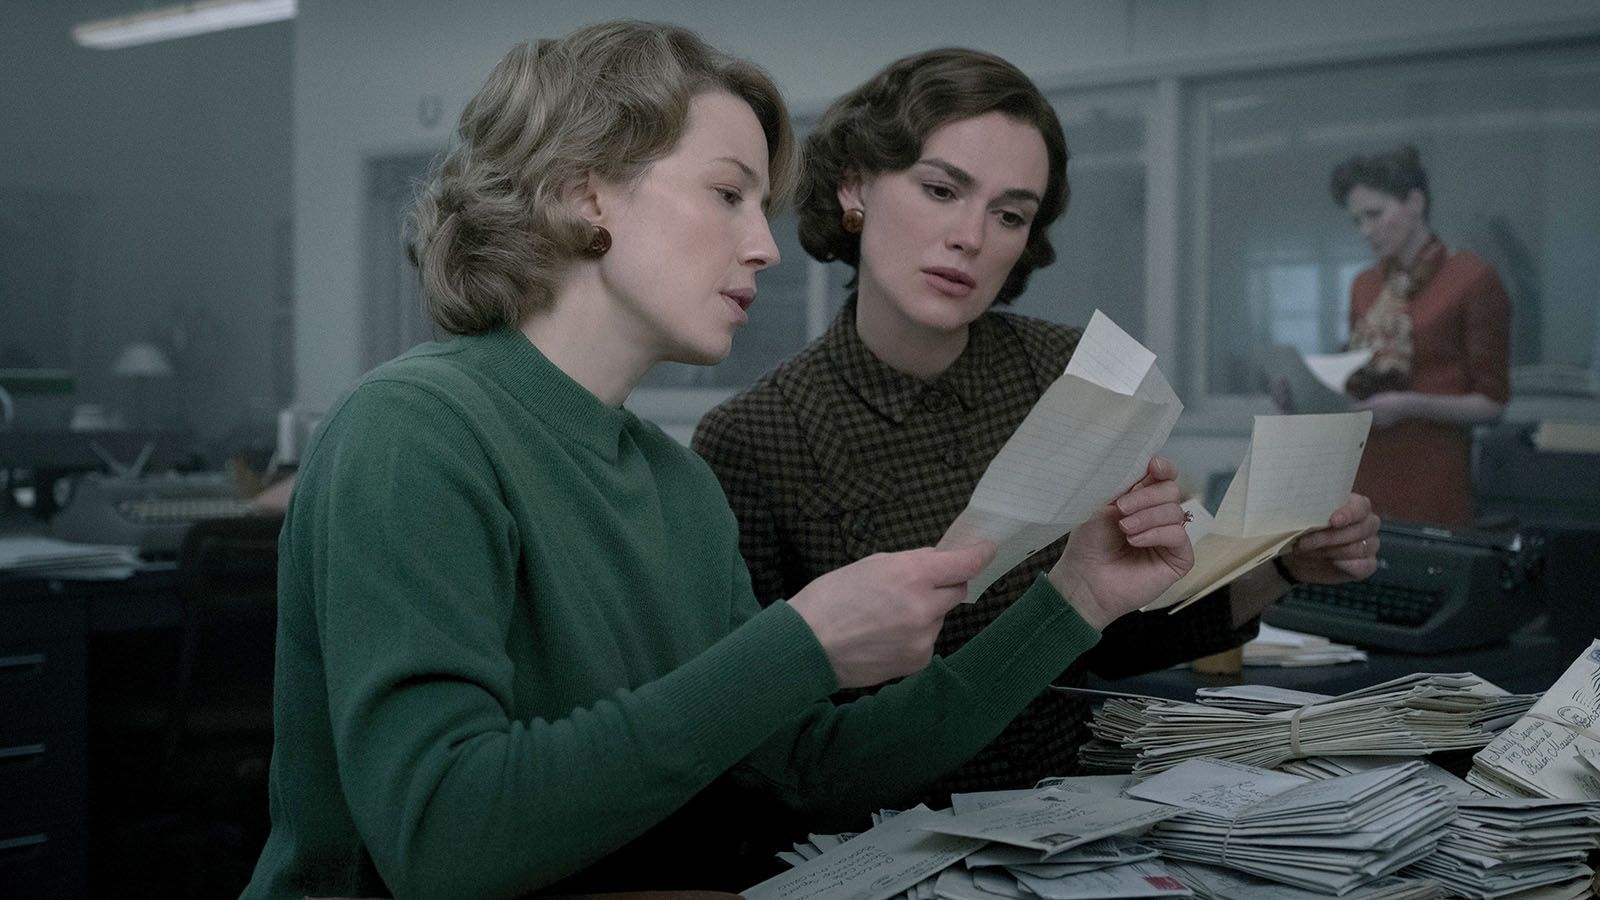 Carrie Coon, left, and Keira Knightley star in Boston Strangler, which will be streaming on Hulu on March 17.